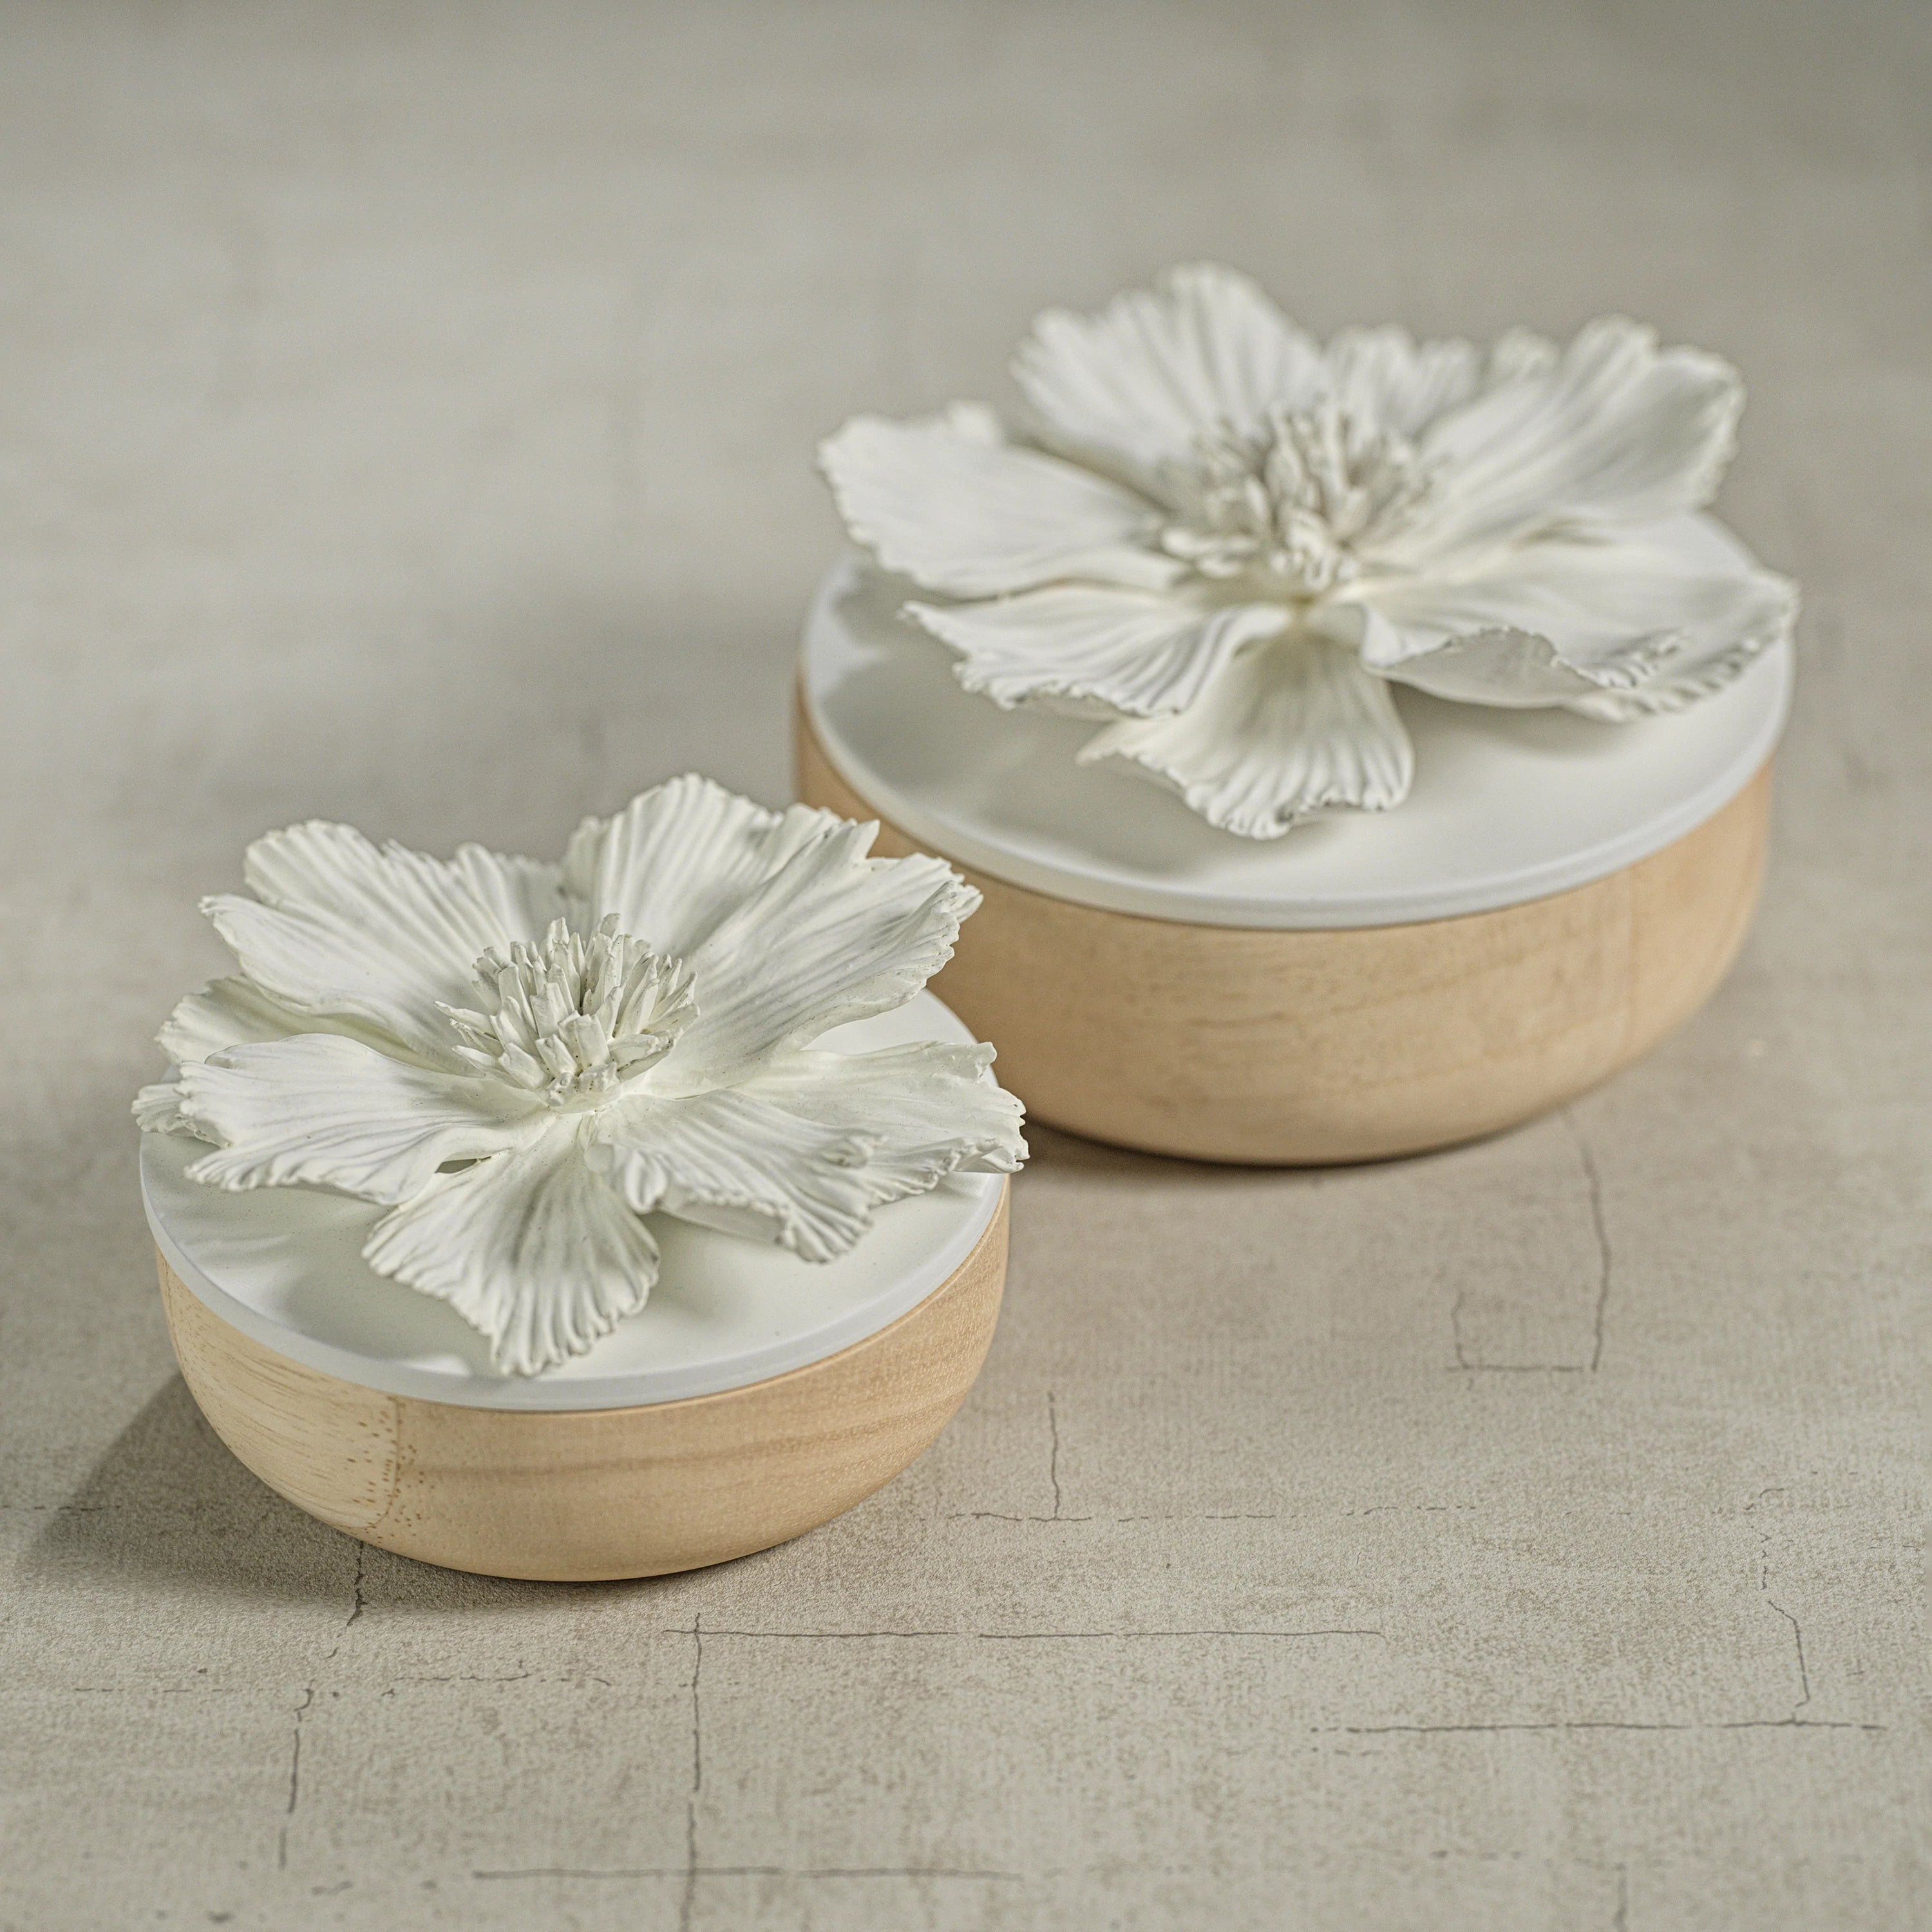 Cosmos Porcelain & Natural Wood Flower Box